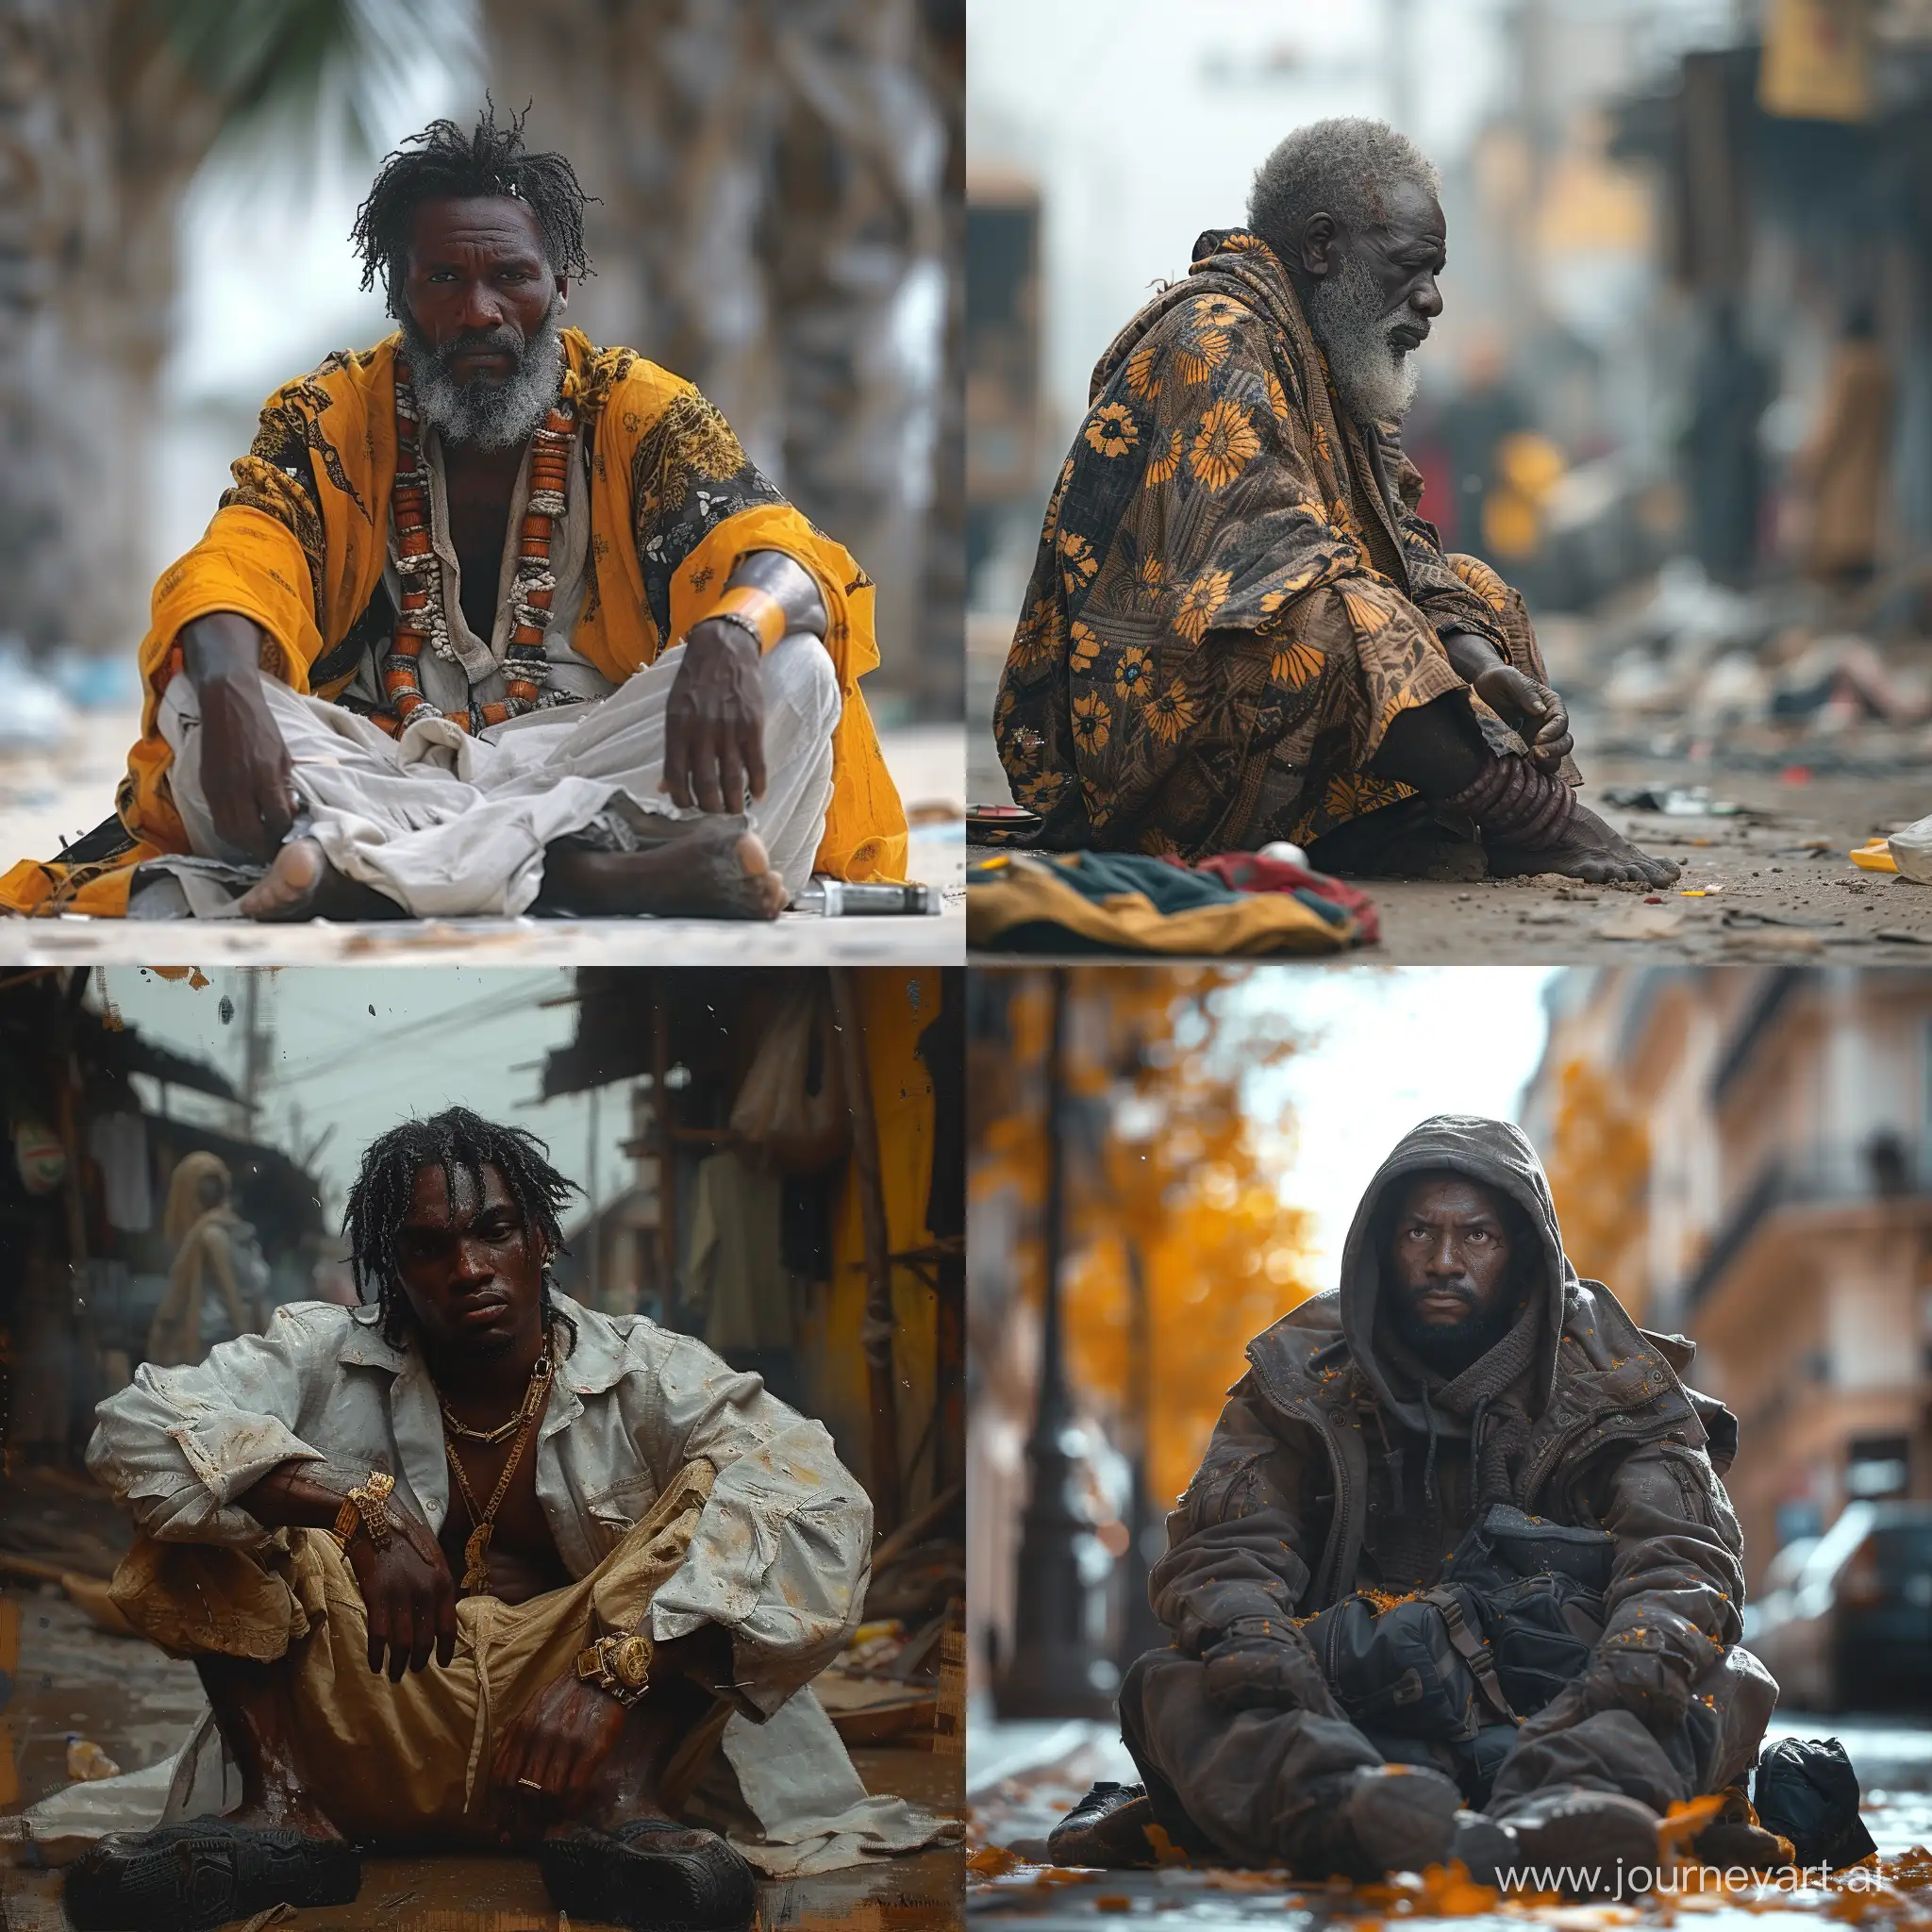 Empathy-Evoked-Capturing-the-Resilience-of-a-Homeless-Soul-in-Urban-Struggles